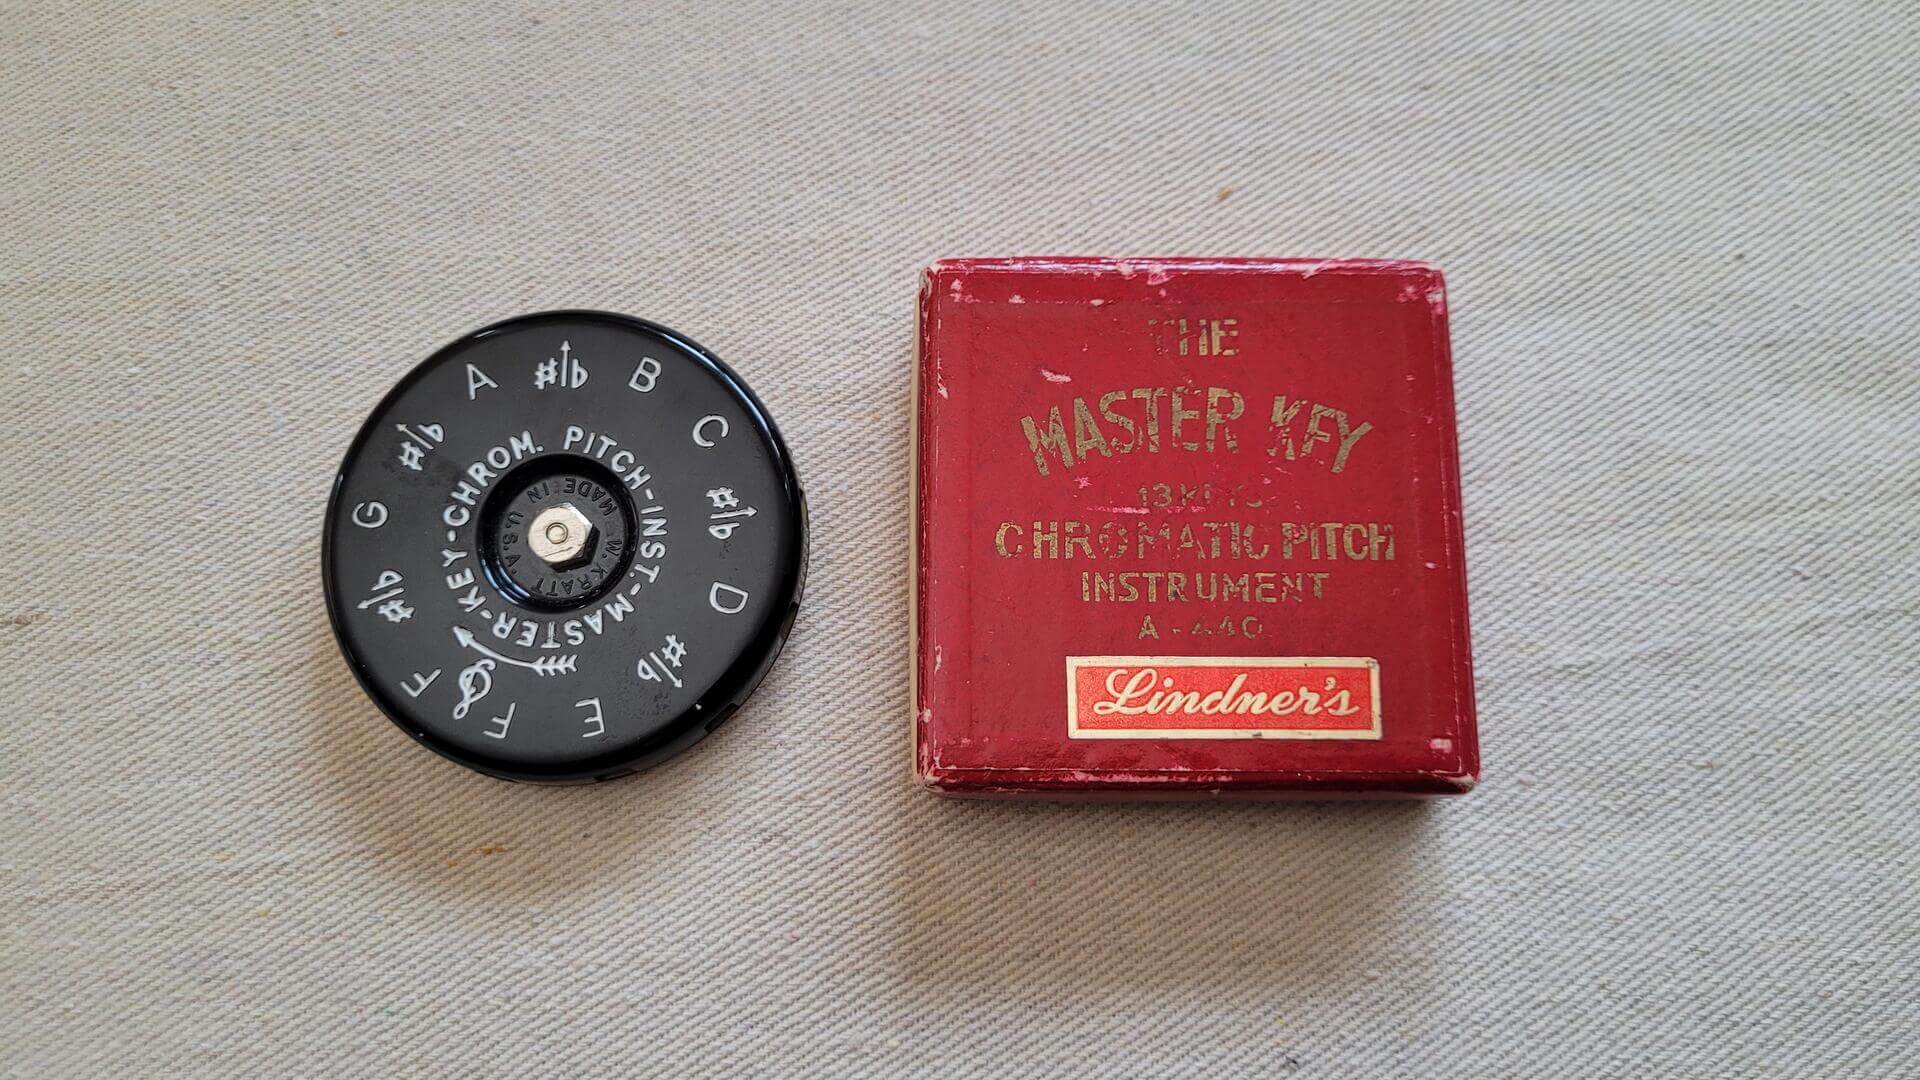 Vintage Linder 14 keys chromatic pitch pipe instrument model a-440 The Master Key by W. Kratt. Antique made in USA music tool and accessory with original red box and retro black and chrome metal design